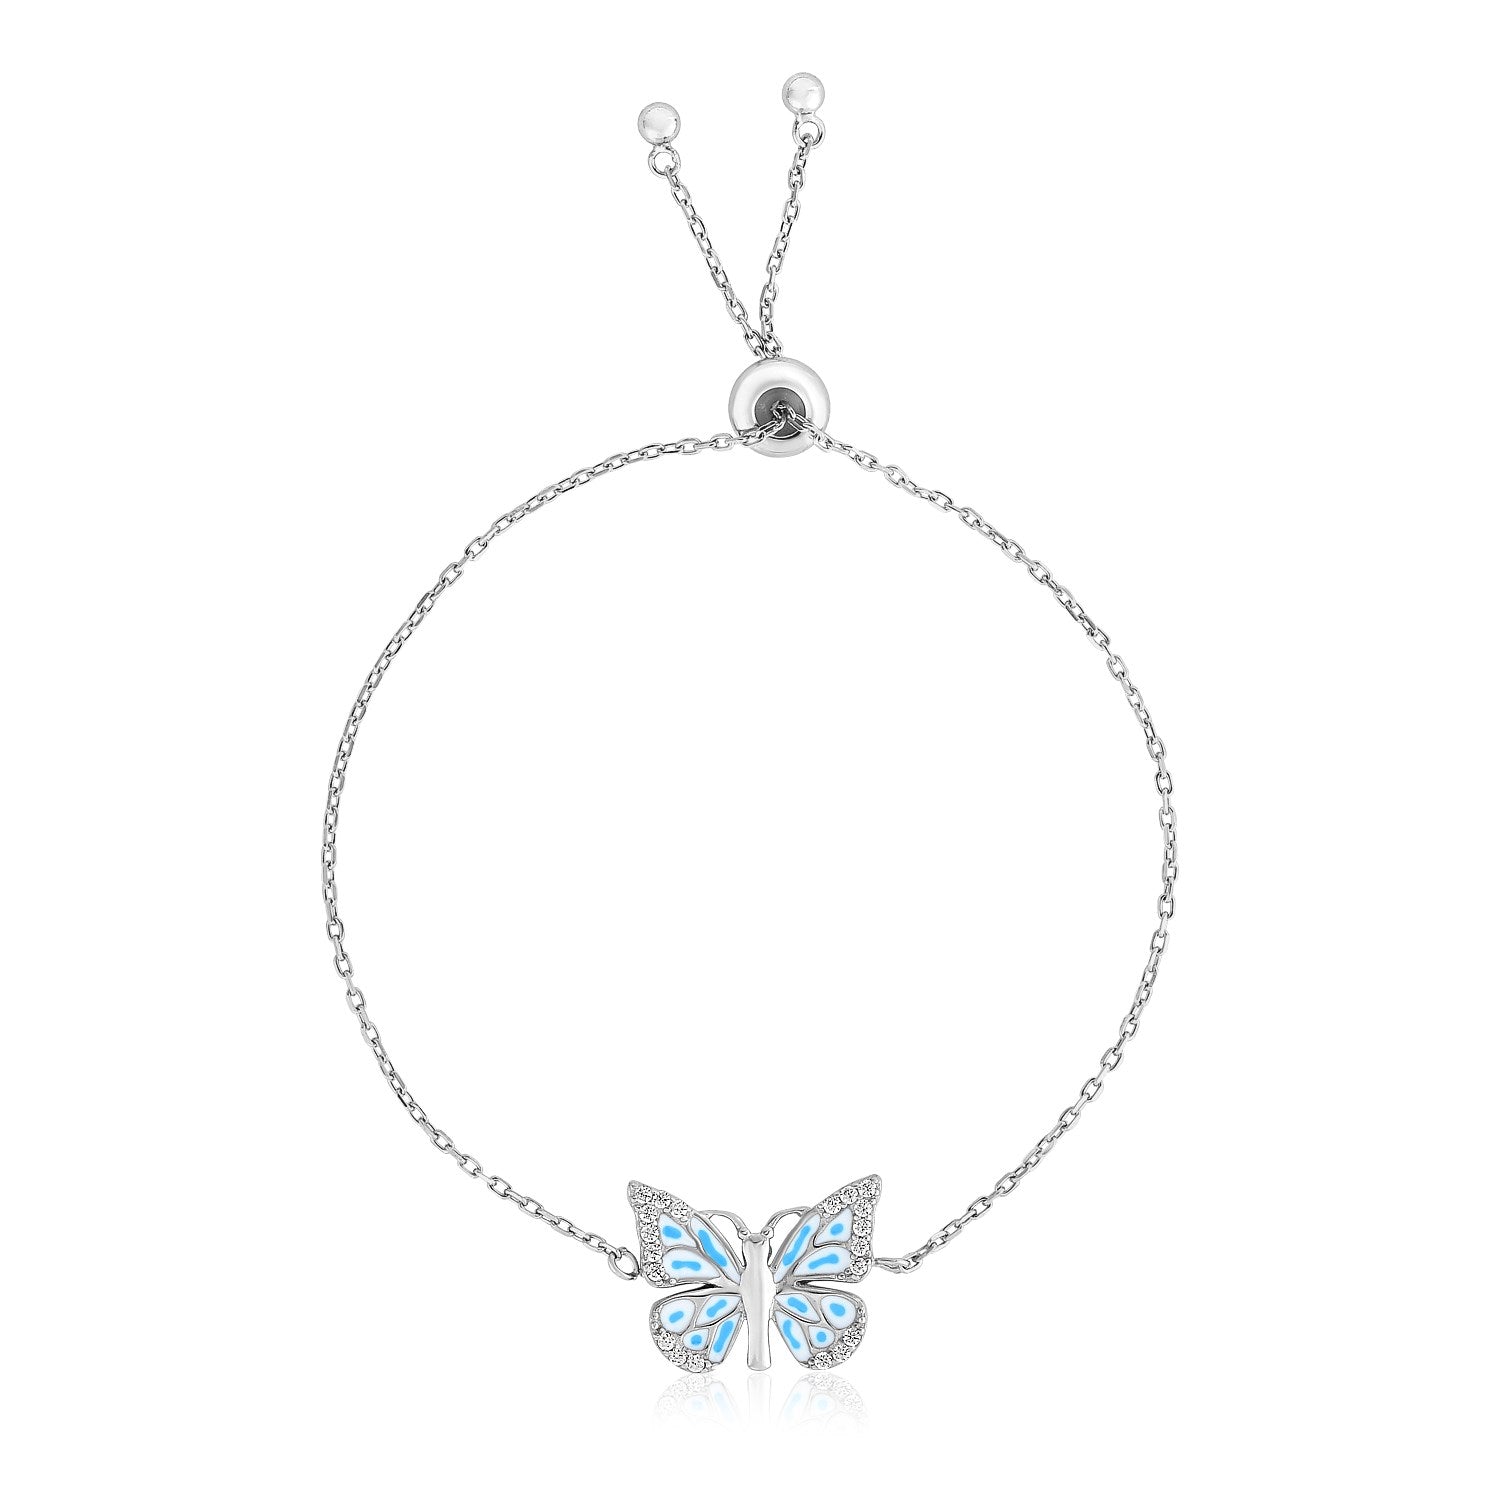 Sterling Silver 9 1/4 inch Adjustable Bracelet with Enameled Butterfly